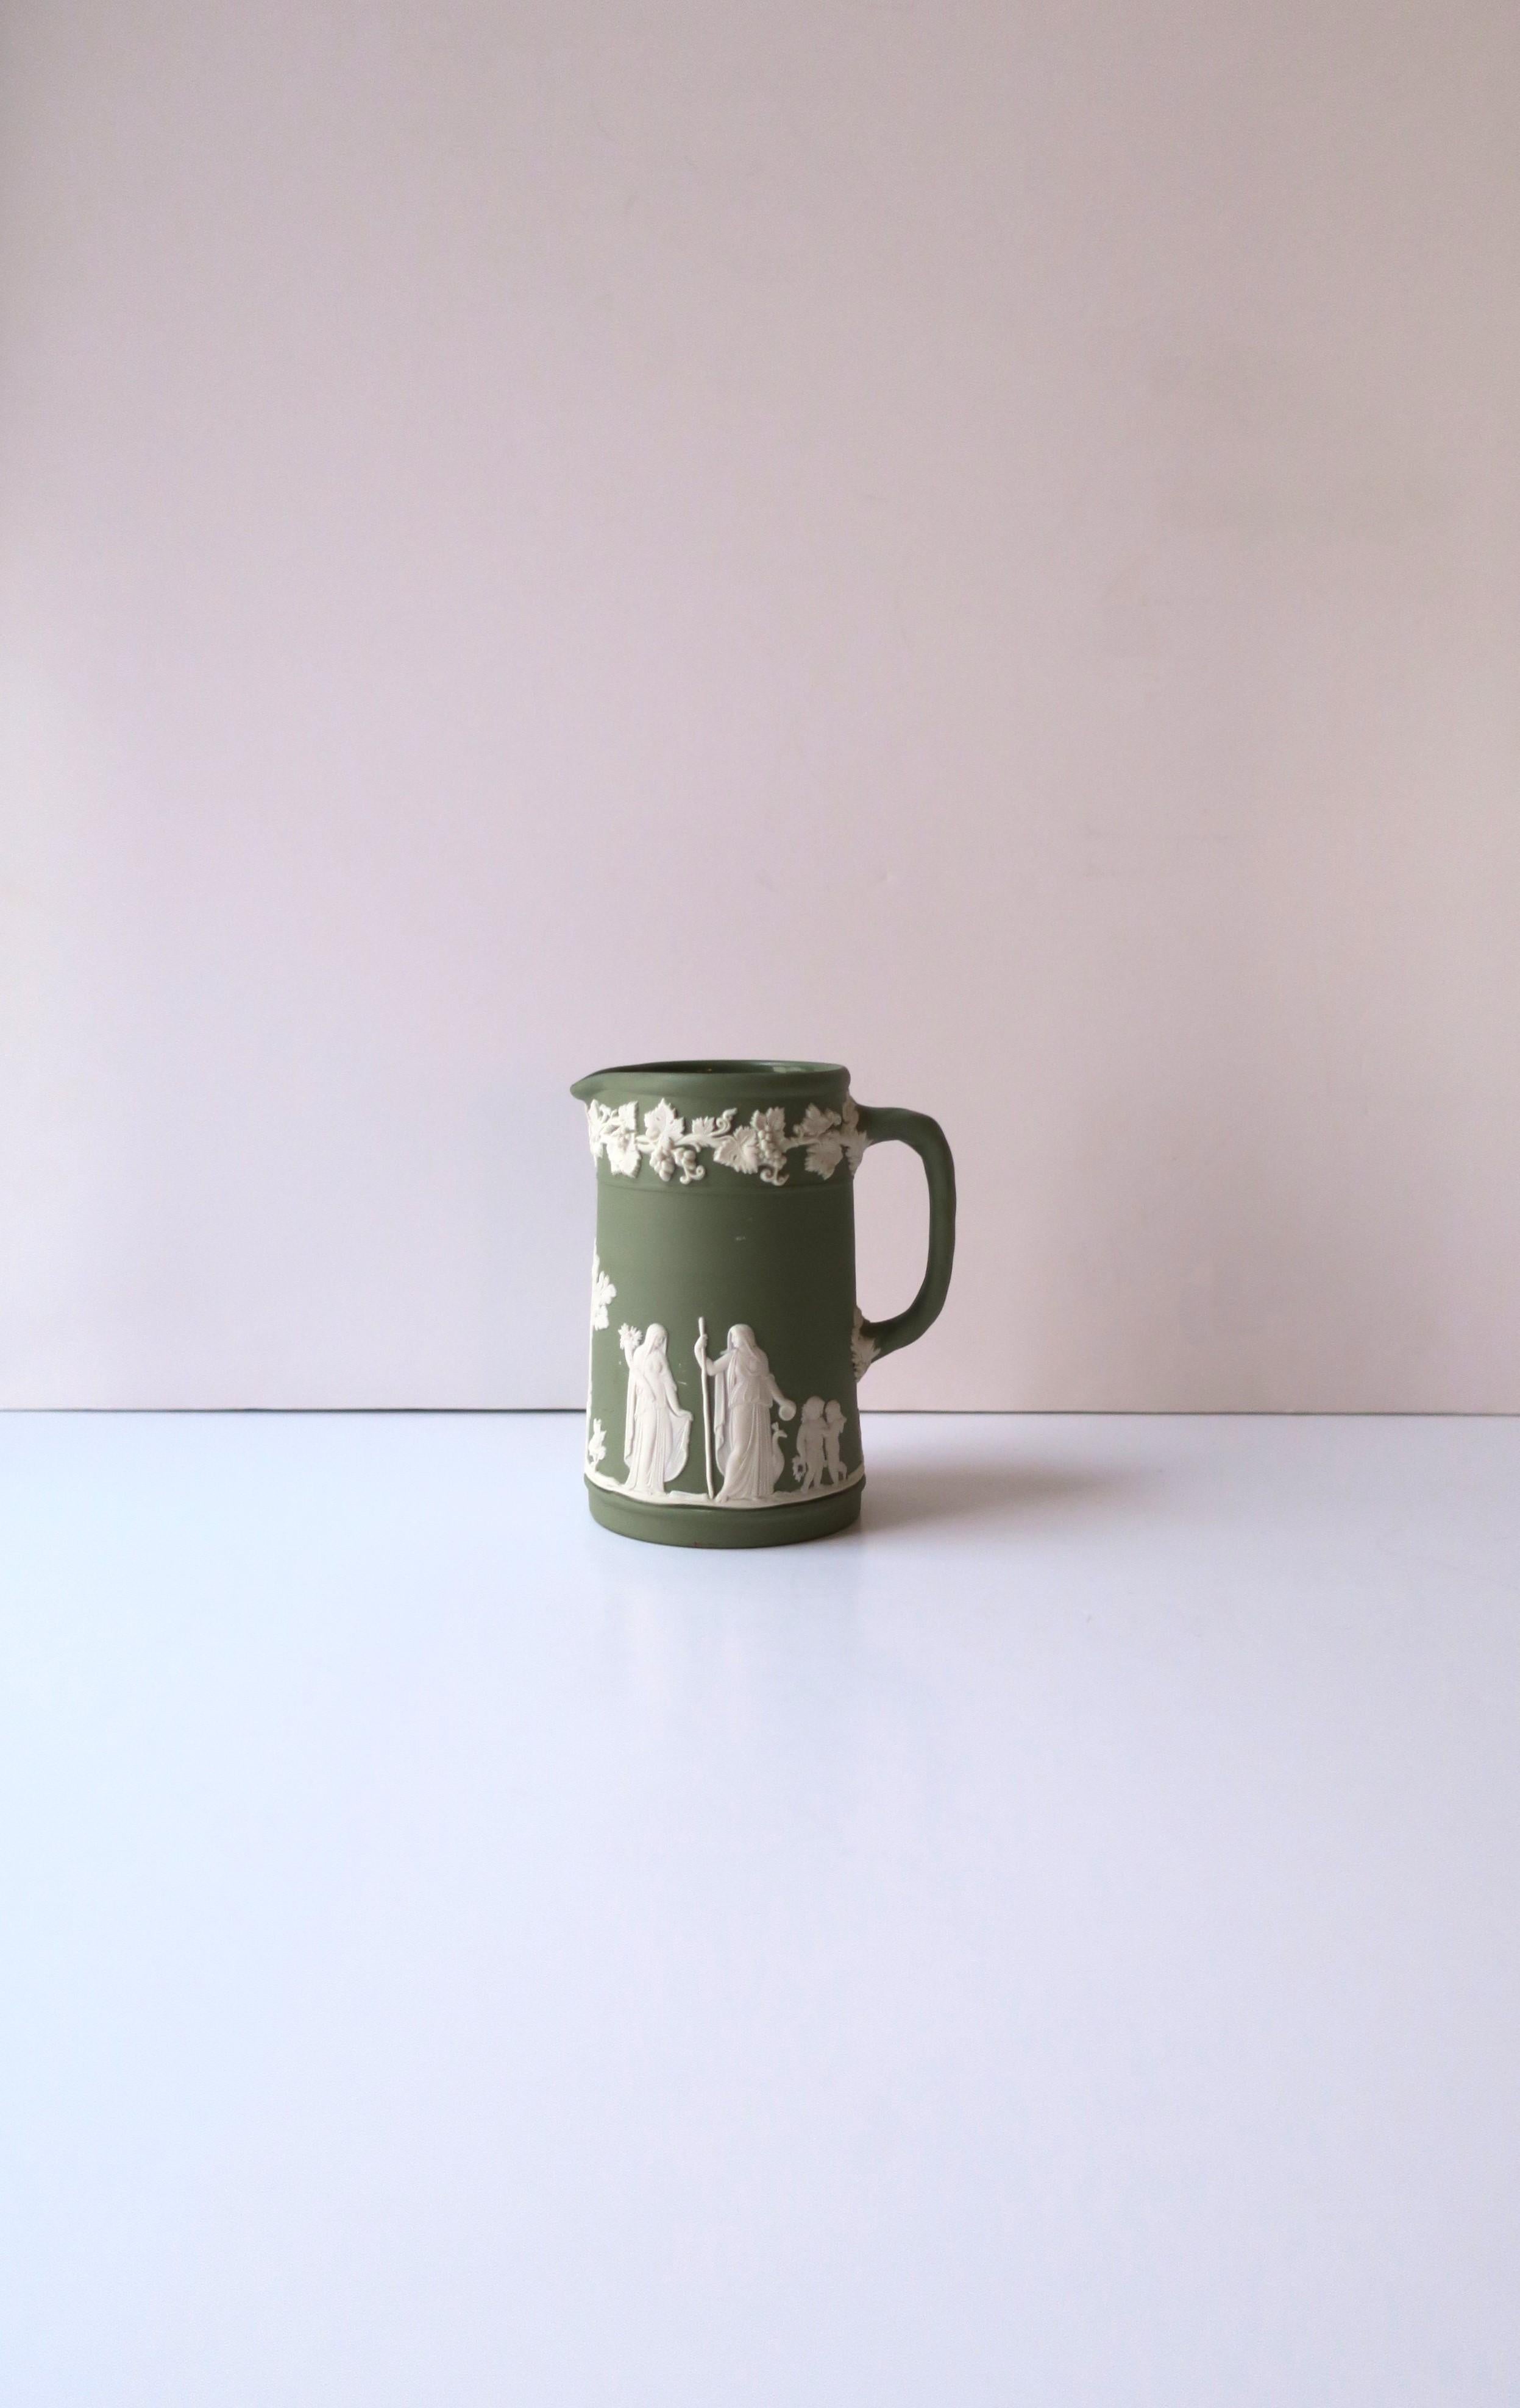 An English sage green and white Jasperware matte stoneware pitcher by Wedgwood in the Neoclassical style, circa early-20thth century, England. Pitcher has a white raised relief of grapes, leaves and vines, around top, base and center area have